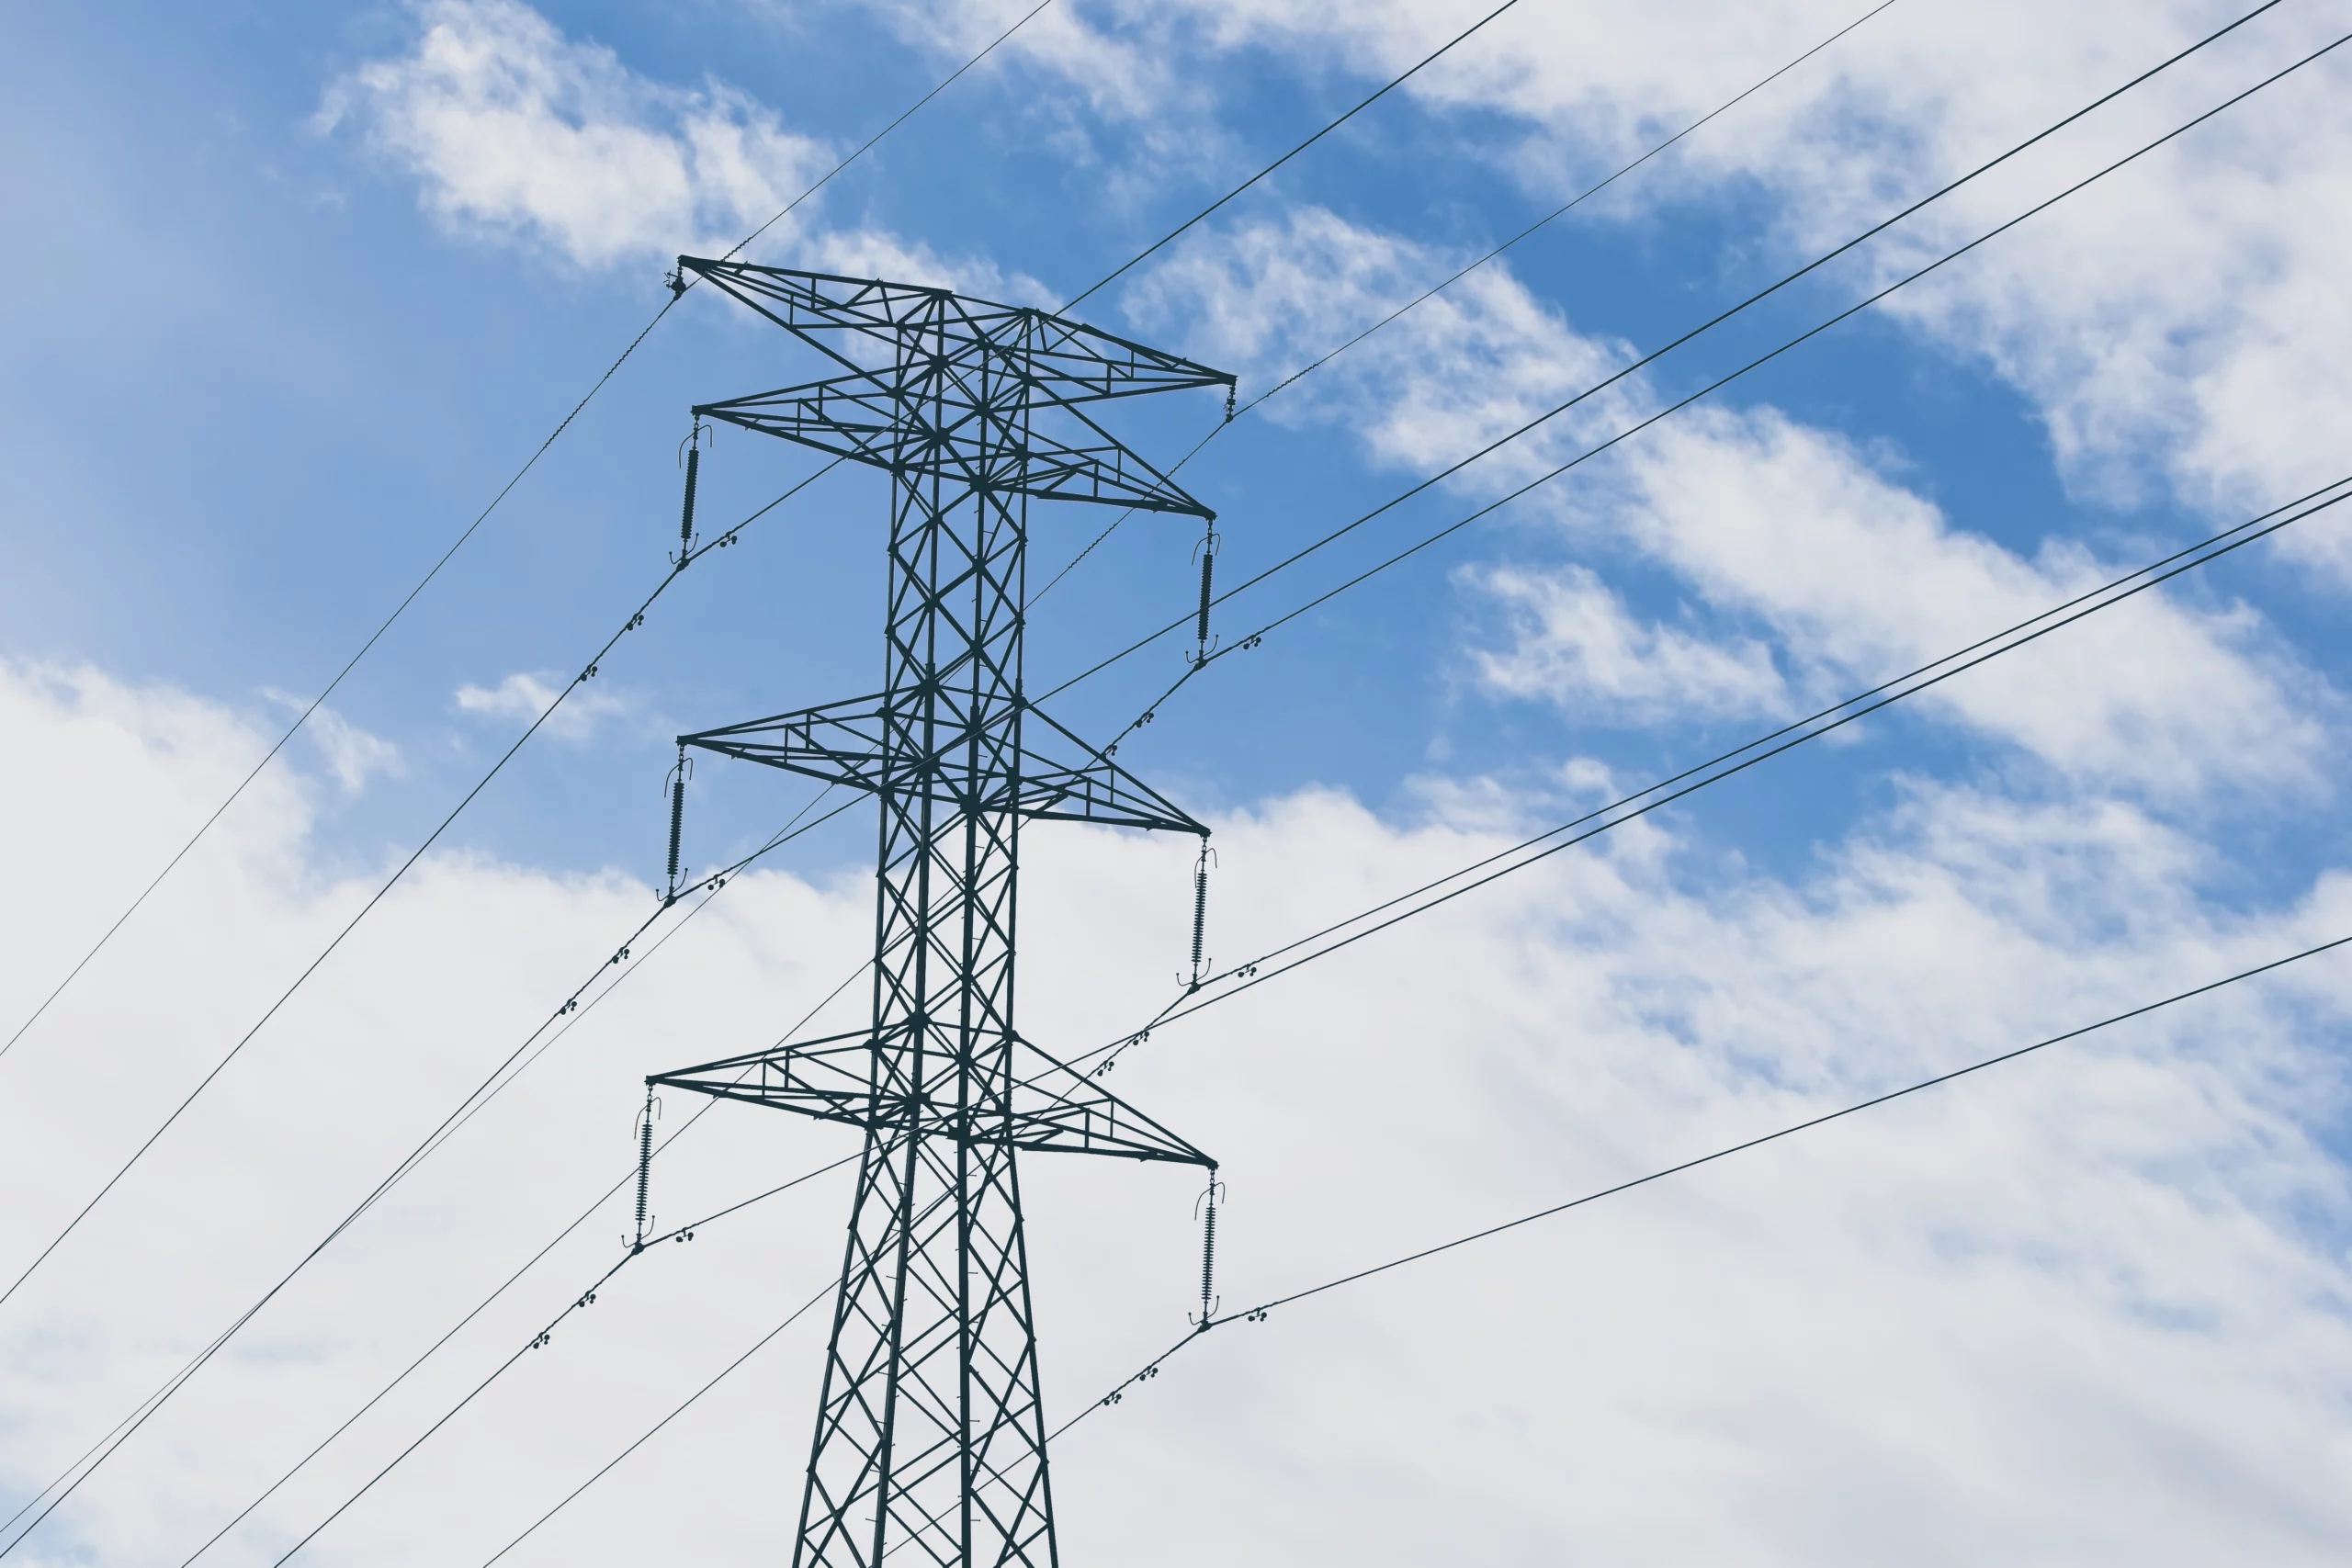 Illustrative image of the grid: picture of high power lines with blue sky background